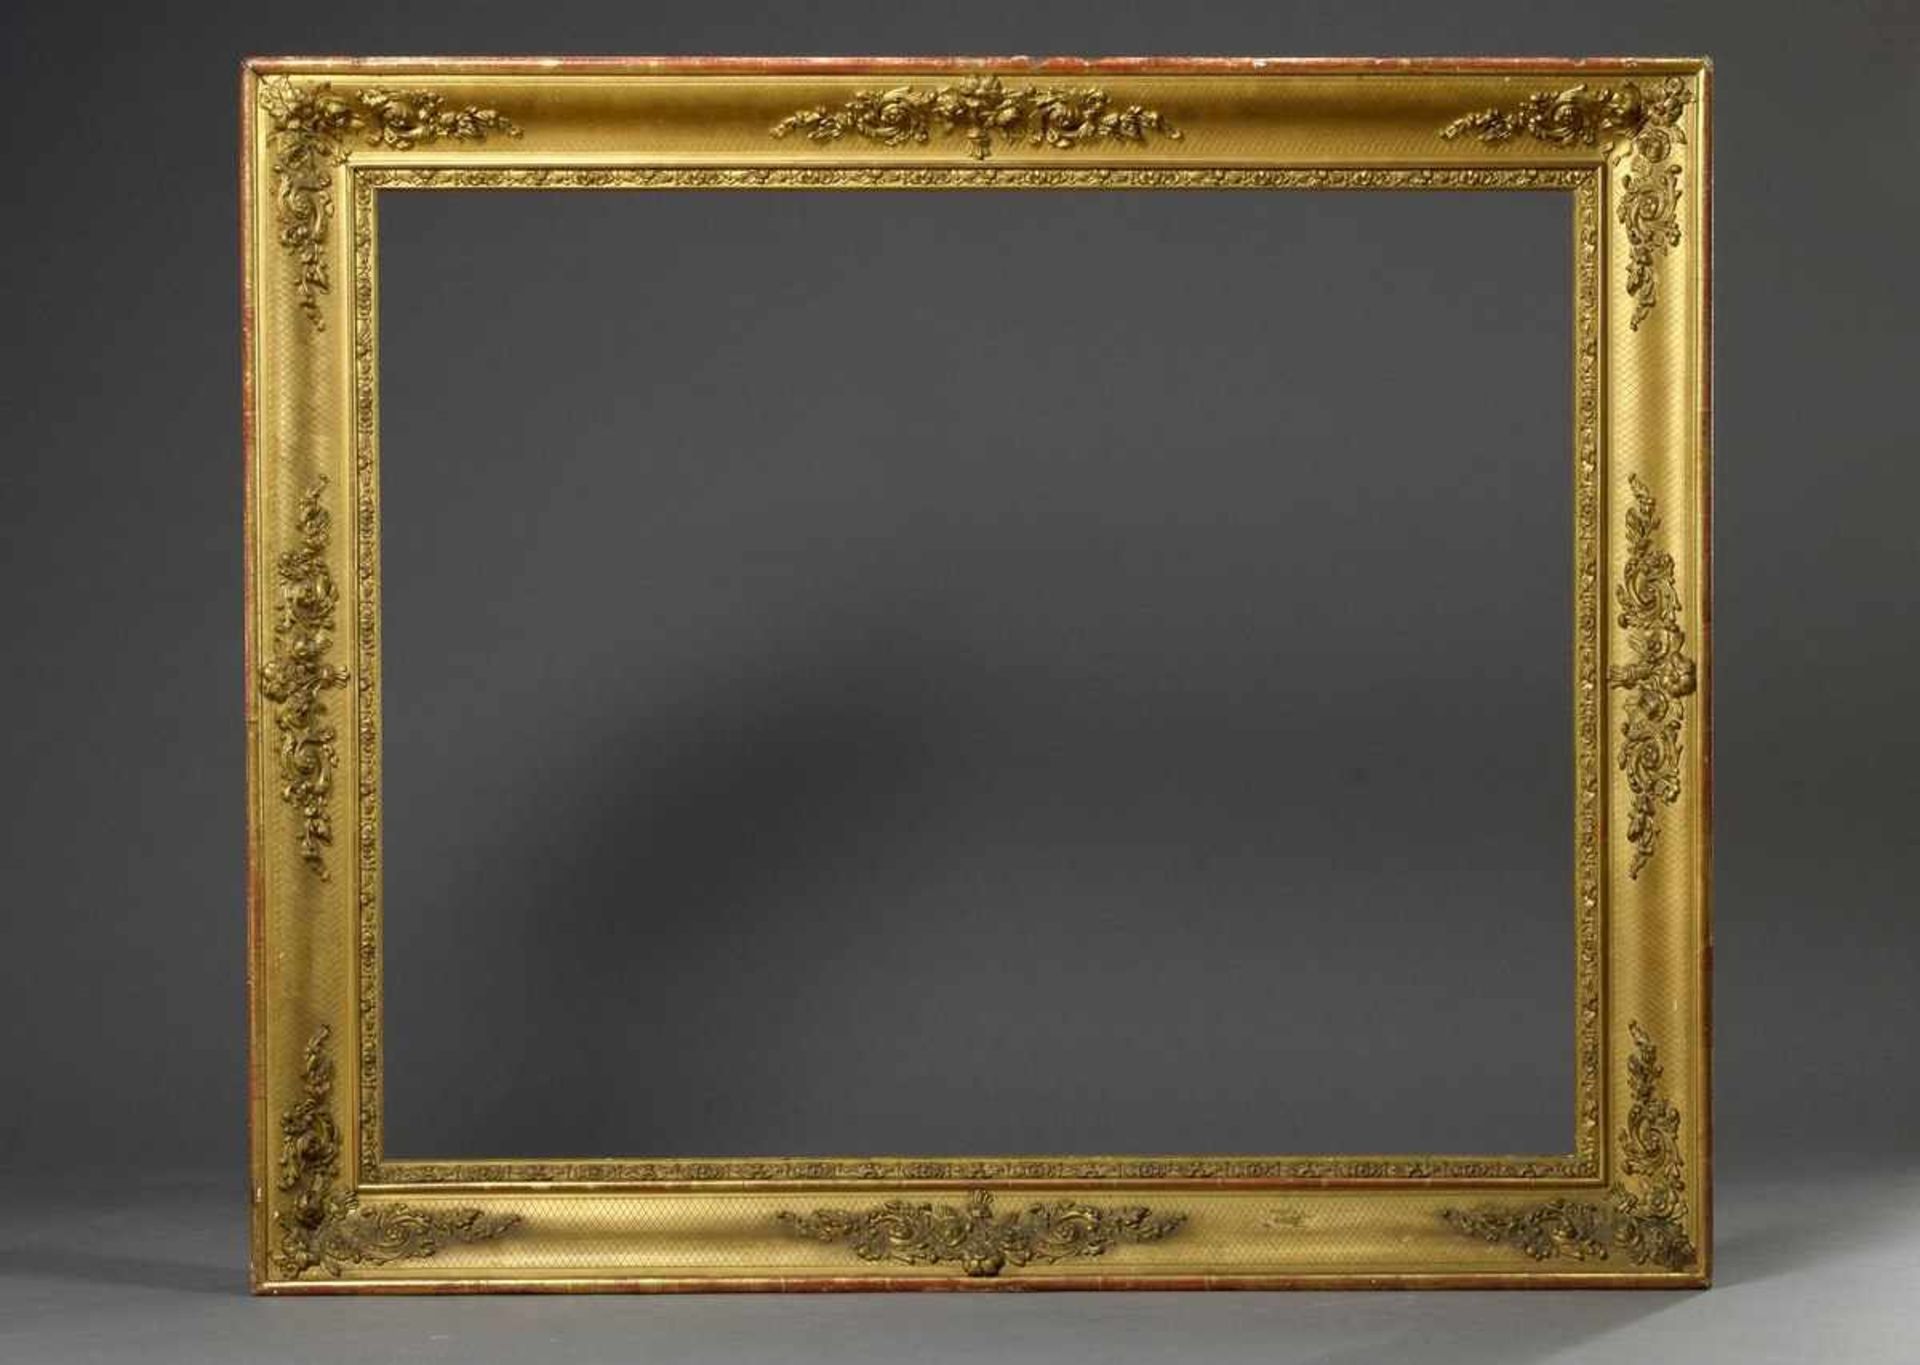 Big gilded frame with groove and stuccoed floral decor over rhombic pattern, 19th century, RD 79,